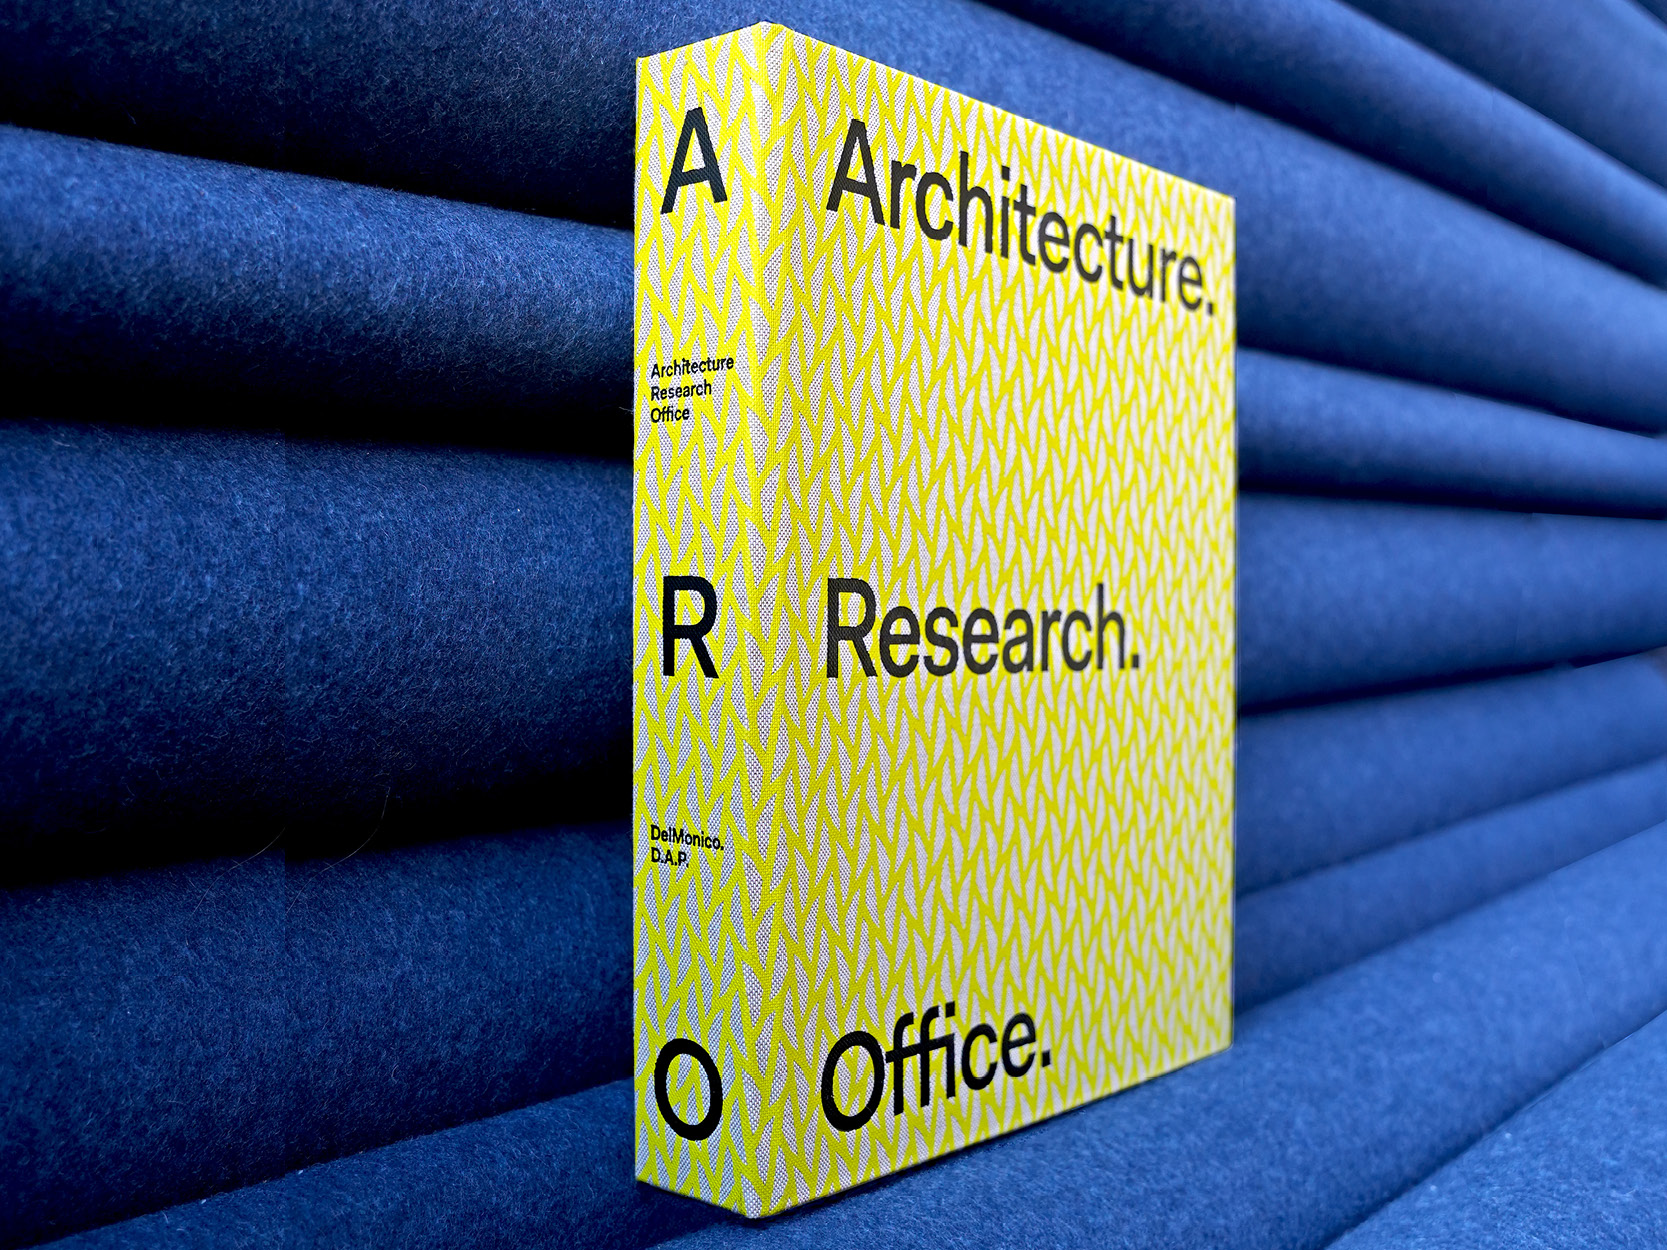 Architecture Research Office book "Architecture. Research. Office." designed by Miko McGinty Published by DelMonico D.A.P. Artbook